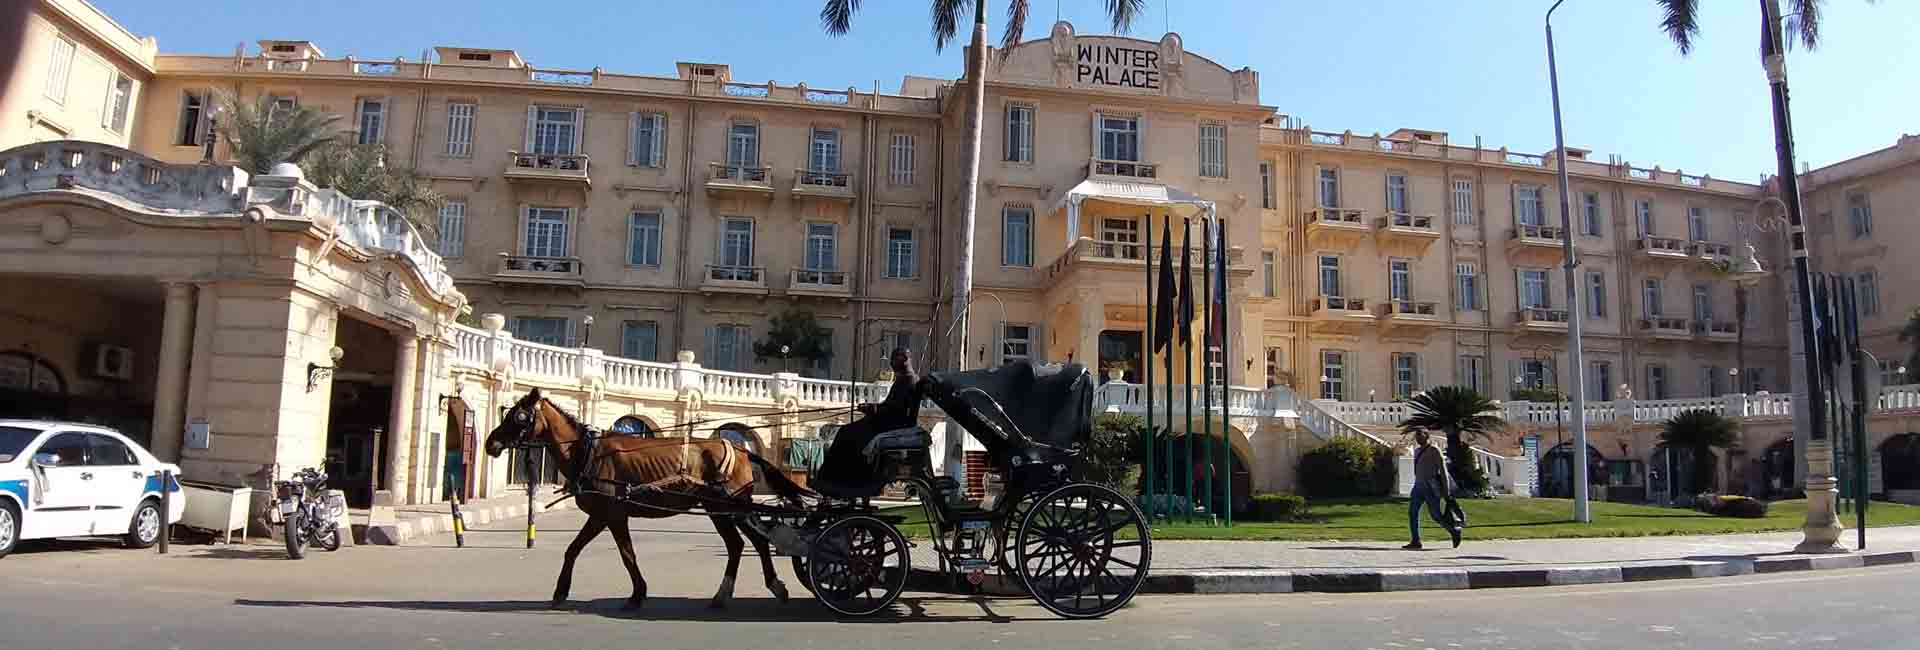 Luxor: Horse-Drawn Carriage